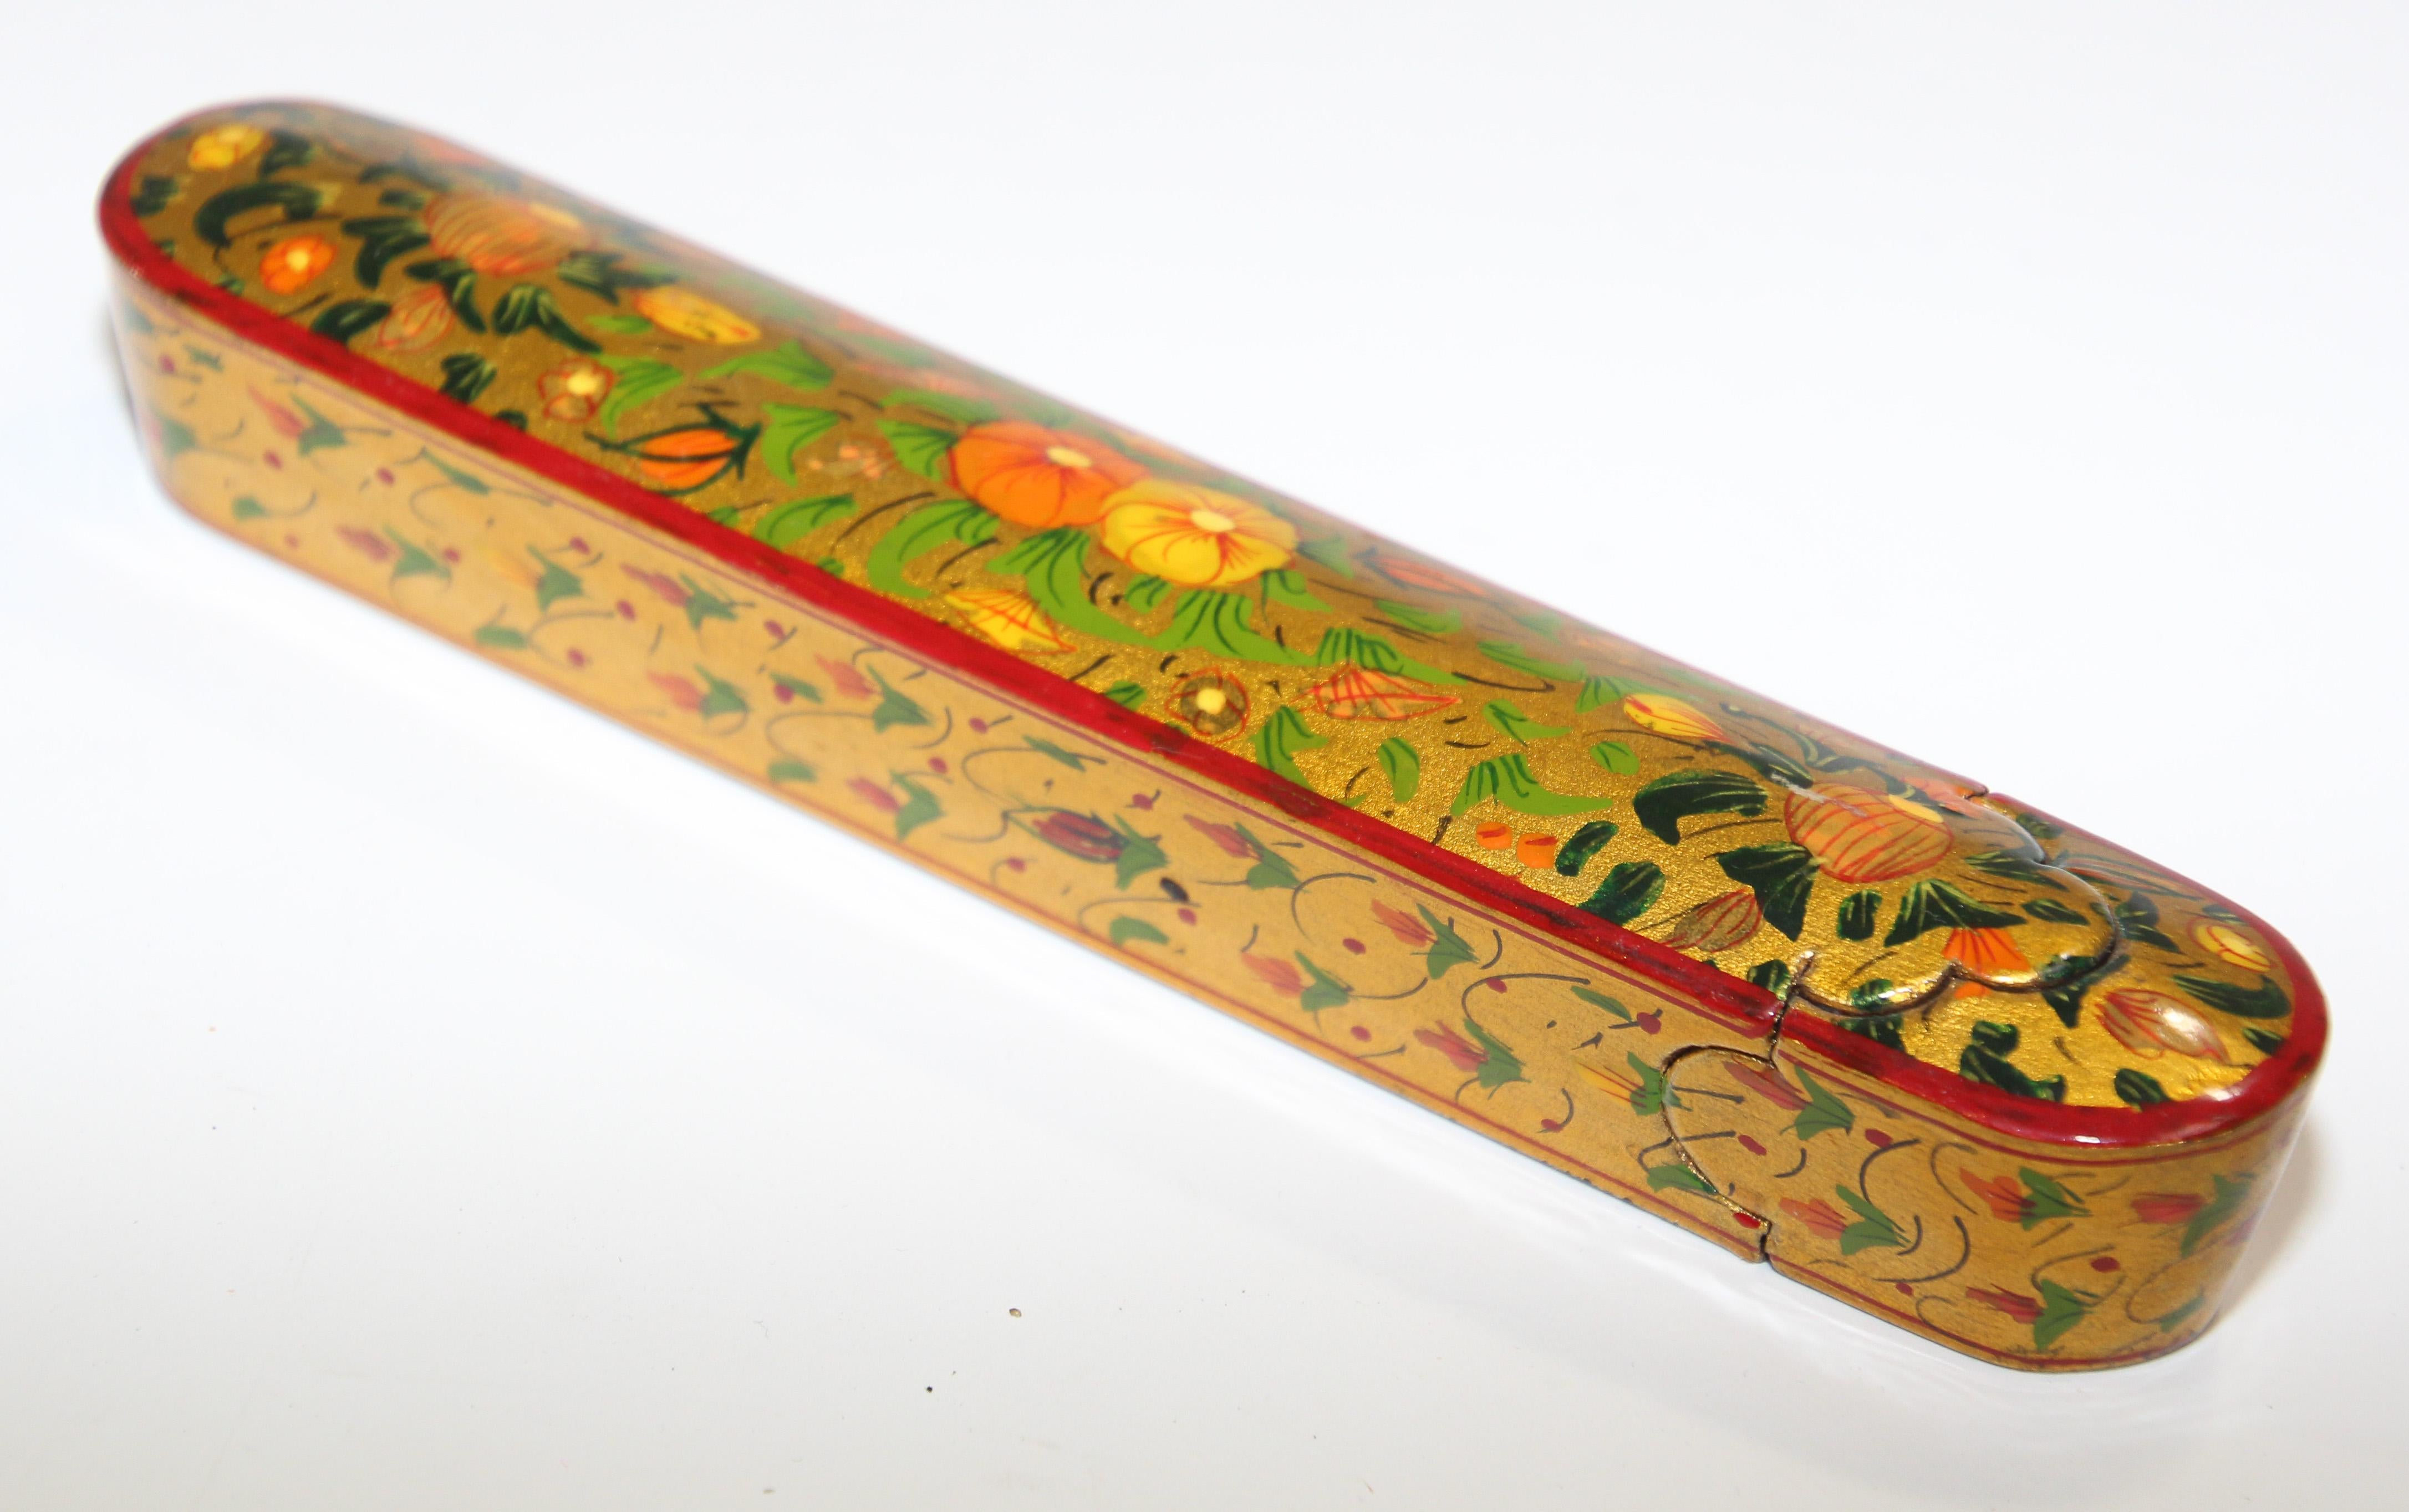 Persian hand painted lacquer pen box in rectangular shape.
Decorated with floral designs on gold background, black interior.
Moorish Mughal pen box papier maché with miniature floral painting in the Persian style.
Great Islamic Art collector